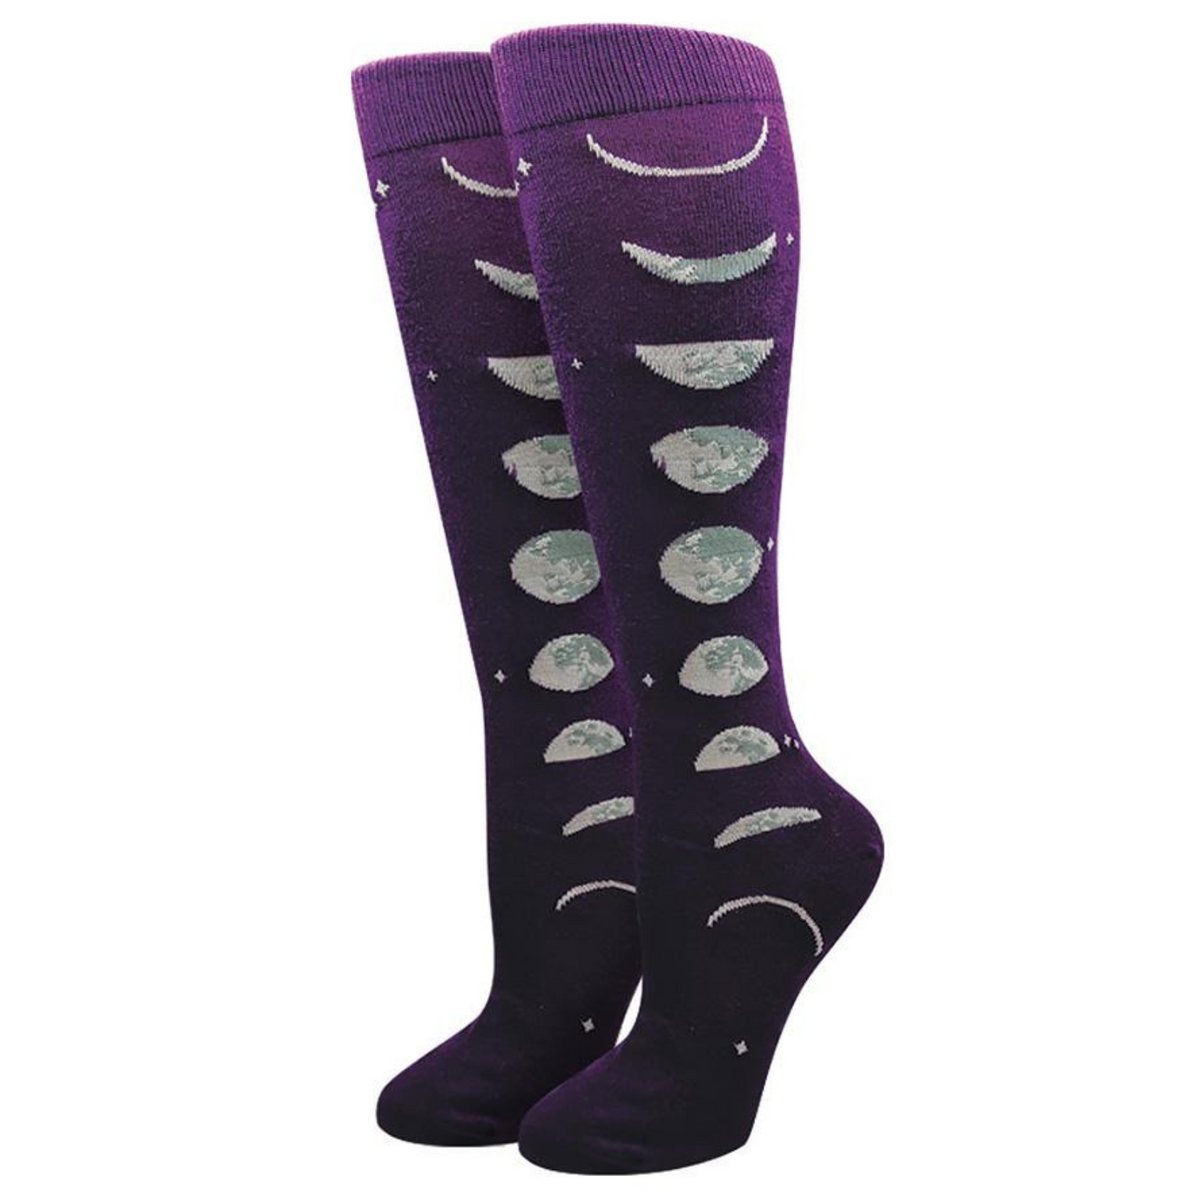 Sock Harbor Moon Pattern purple knee high women&#39;s sock featuring the moon in its various phases along the length of the sock